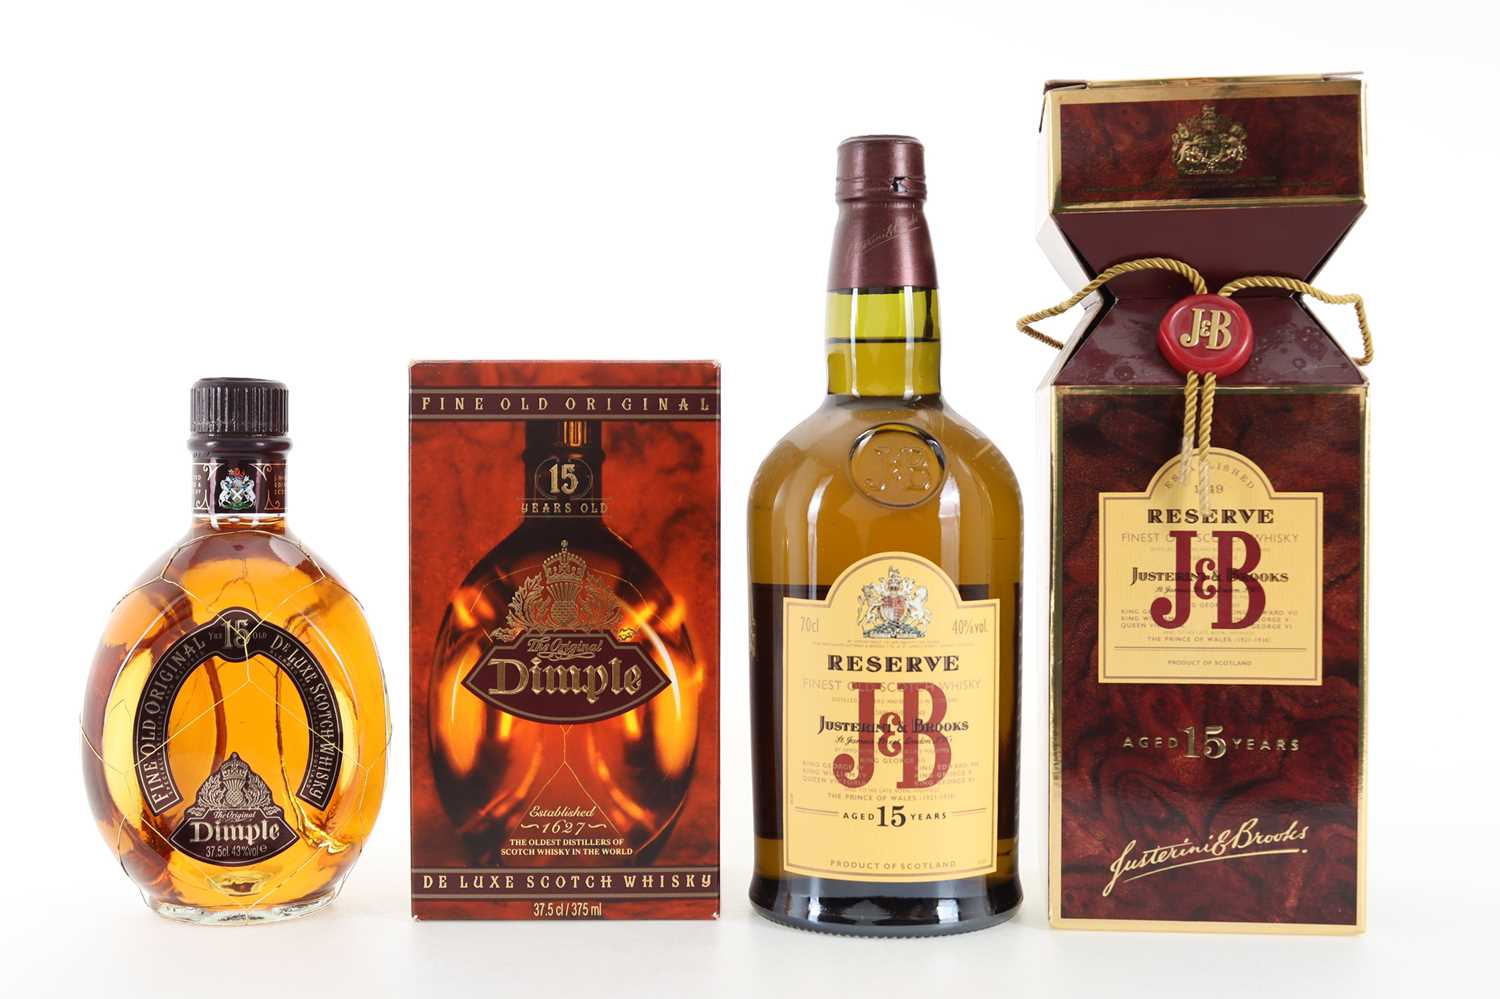 J&B 15 YEAR OLD RESERVE AND DIMPLE 15 YEAR OLD HALF BOTTLE 37.5CL BLENDED WHISKY